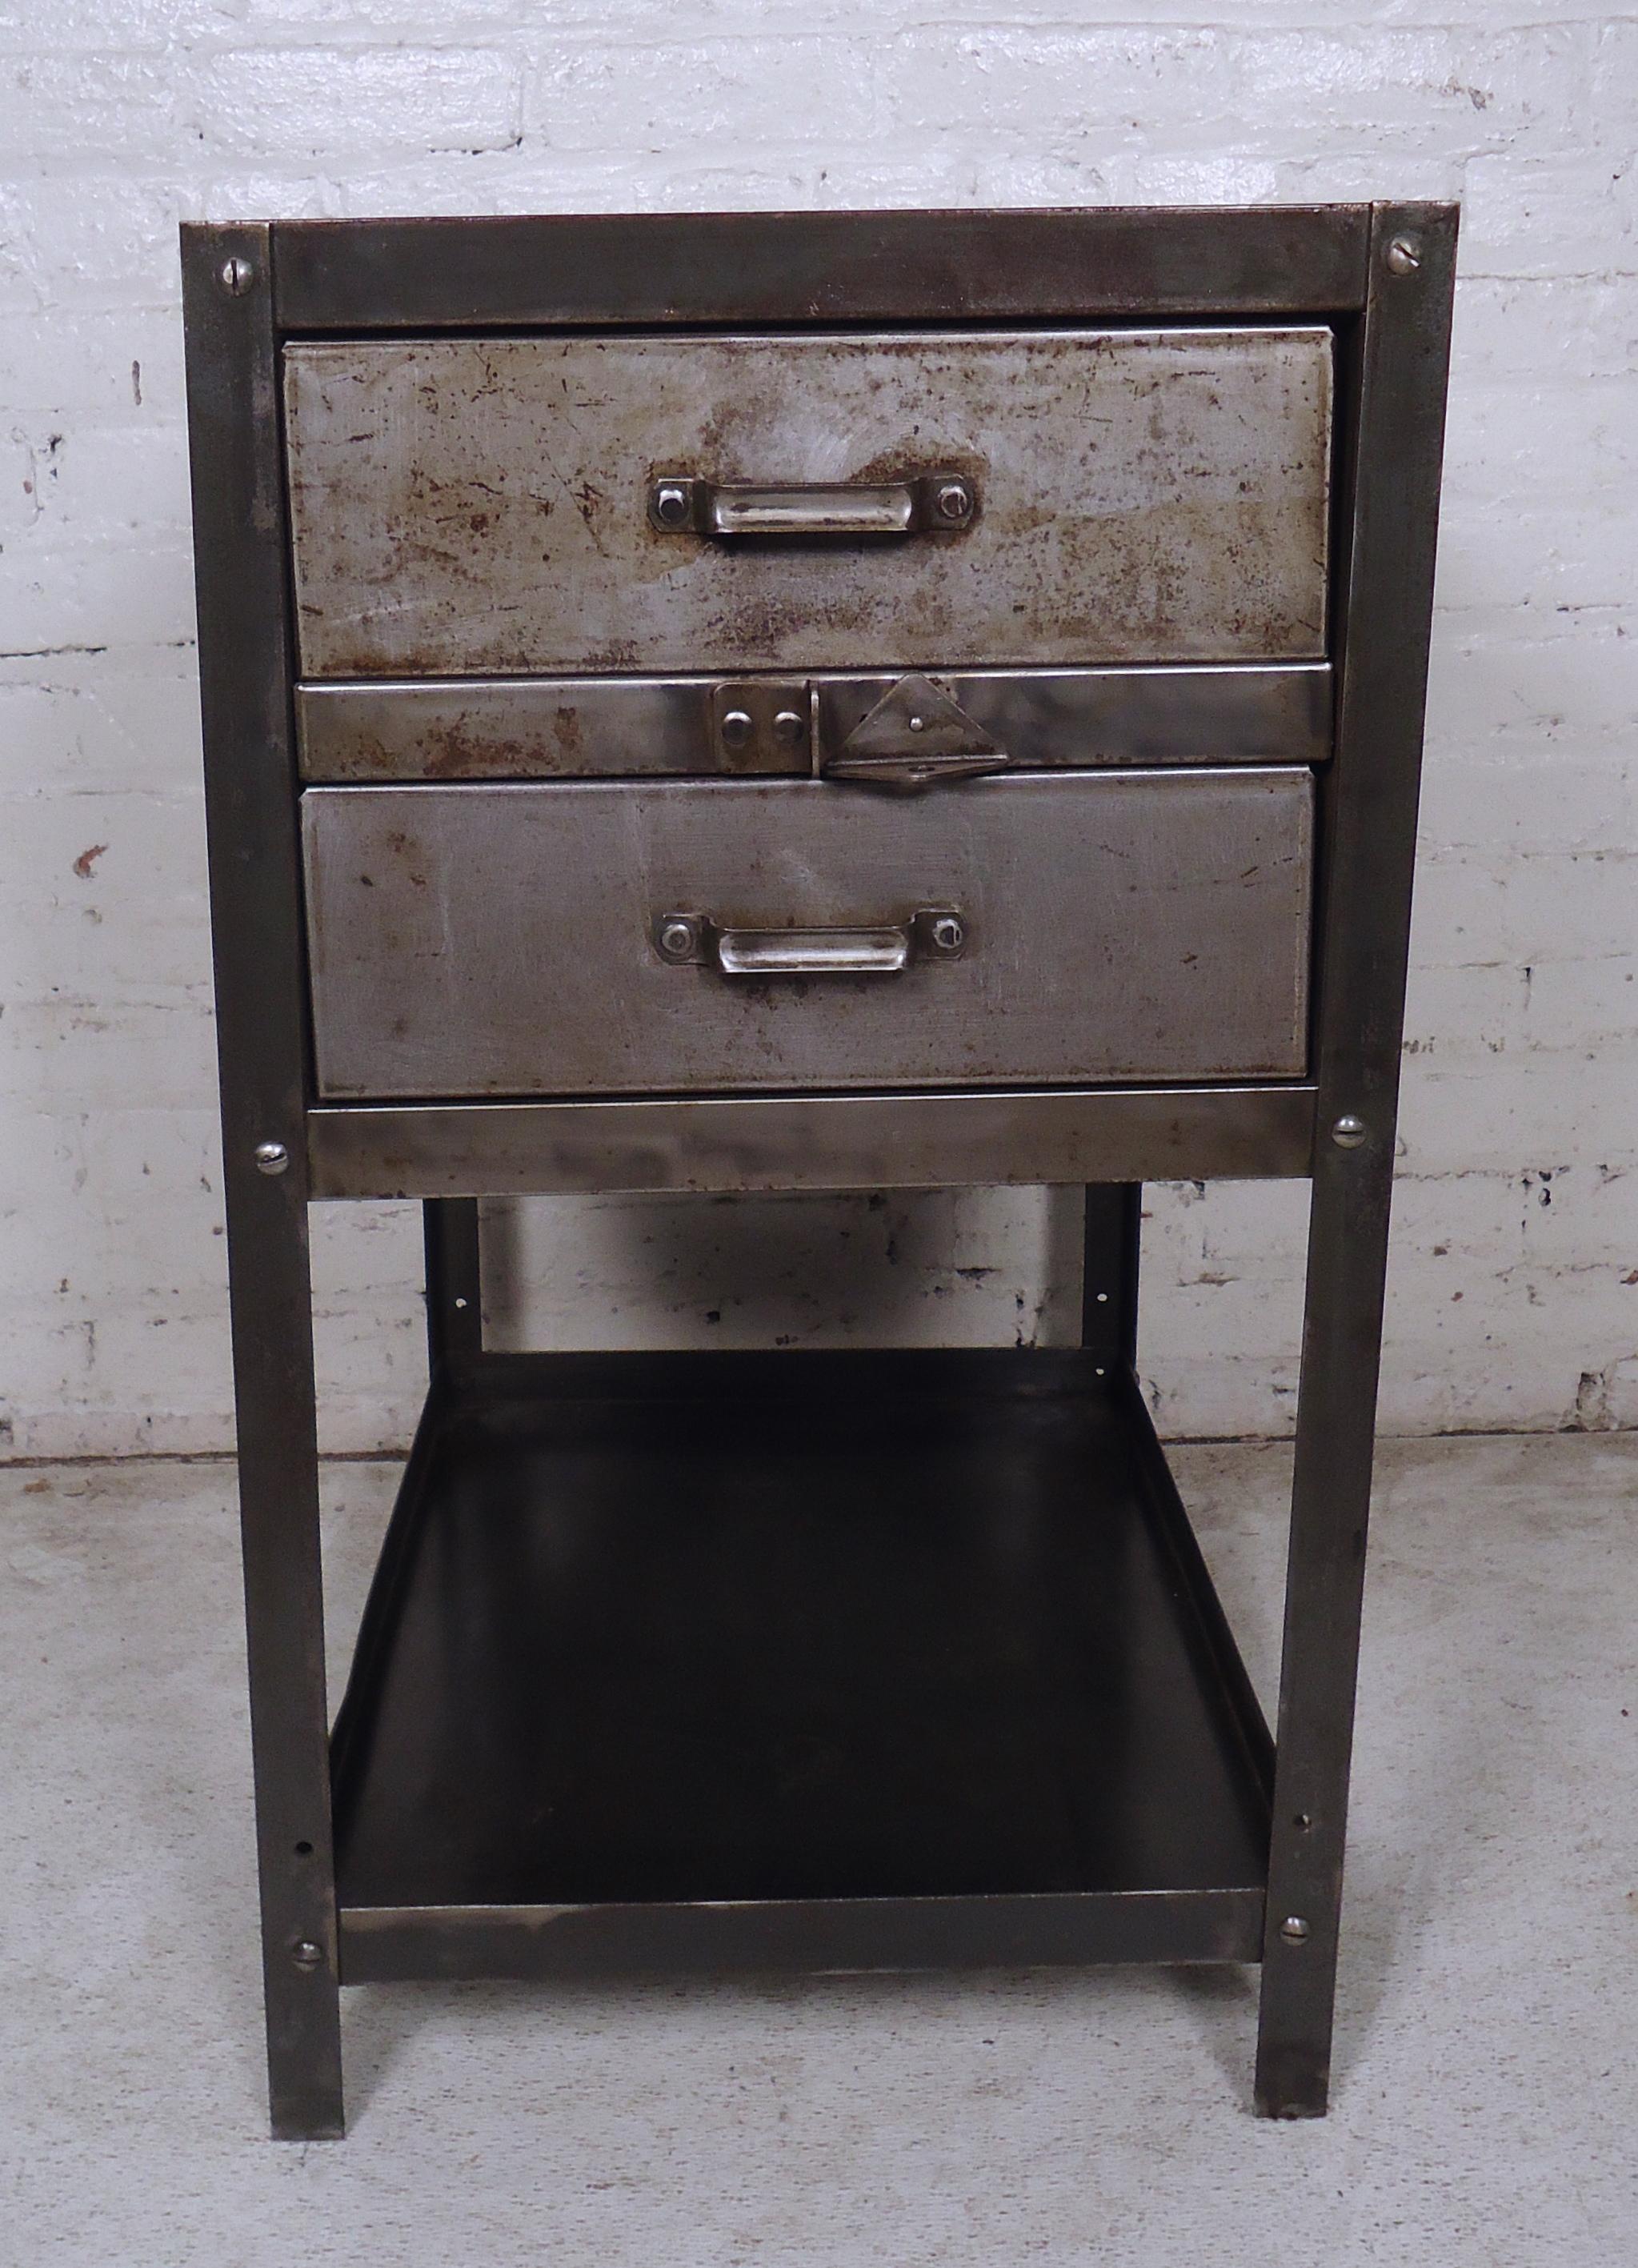 This vintage modern industrial metal side cabinet features two drawers and two tiers for storage.

Please confirm item location NY or NJ with dealer.